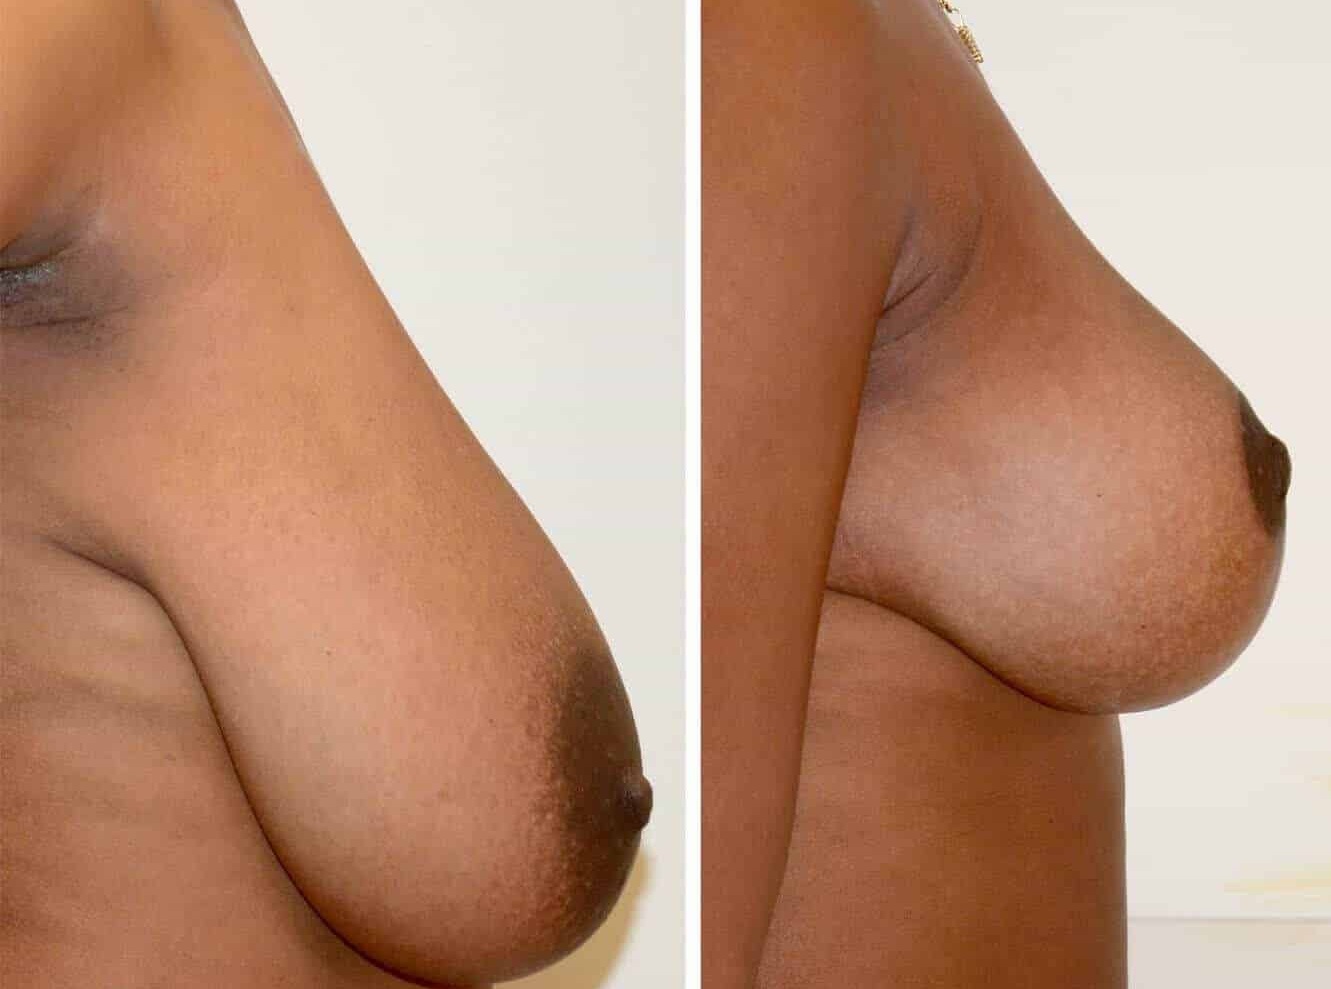 Side profile comparison of breast reduction and liposuction in Toronto. The 'Before' image shows a significantly larger breast with a downward pointing nipple, indicative of a heavy, pendulous breast. The 'After' image reveals a much smaller, lifted breast with the nipple repositioned to a more central location on the breast, creating a more proportionate silhouette.